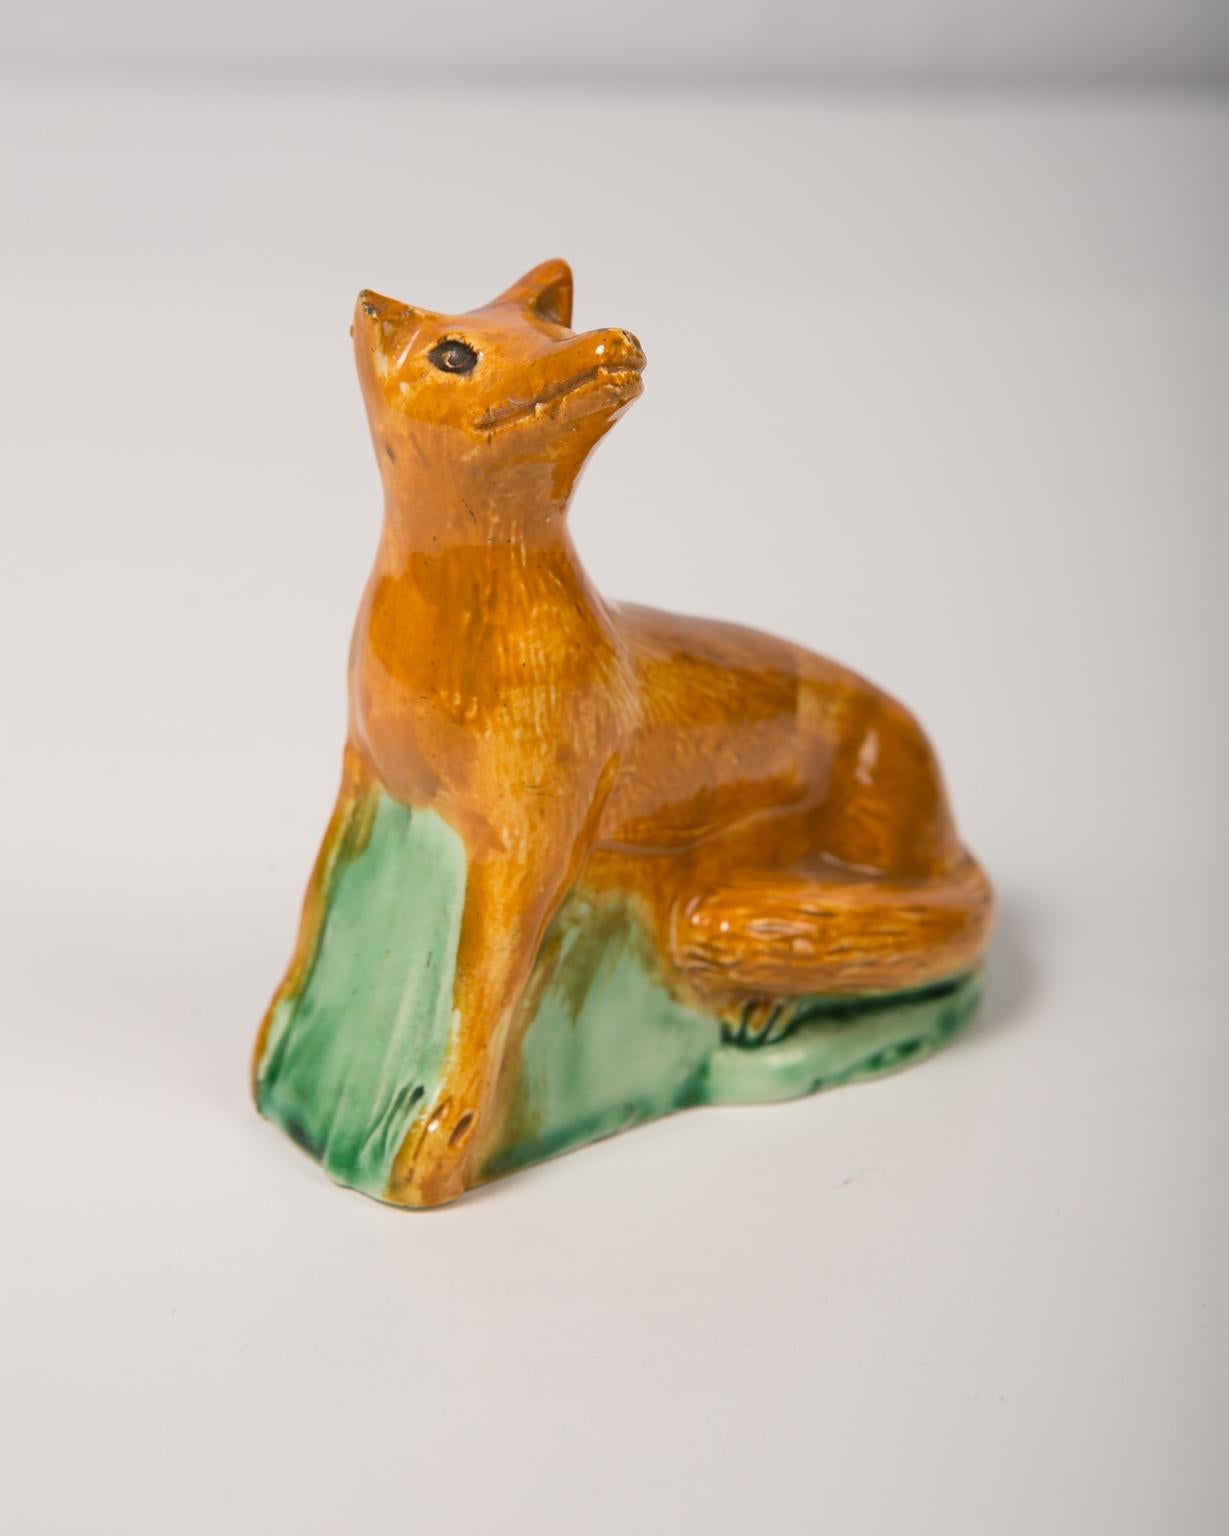 A late 18th century small creamware figure of a fox pressed out in a mold and hollow on the inside in the 18th century creamware style. Made in England, circa 1790. We can see the brushstrokes of the orange glaze on the fox's coat. His eyes are